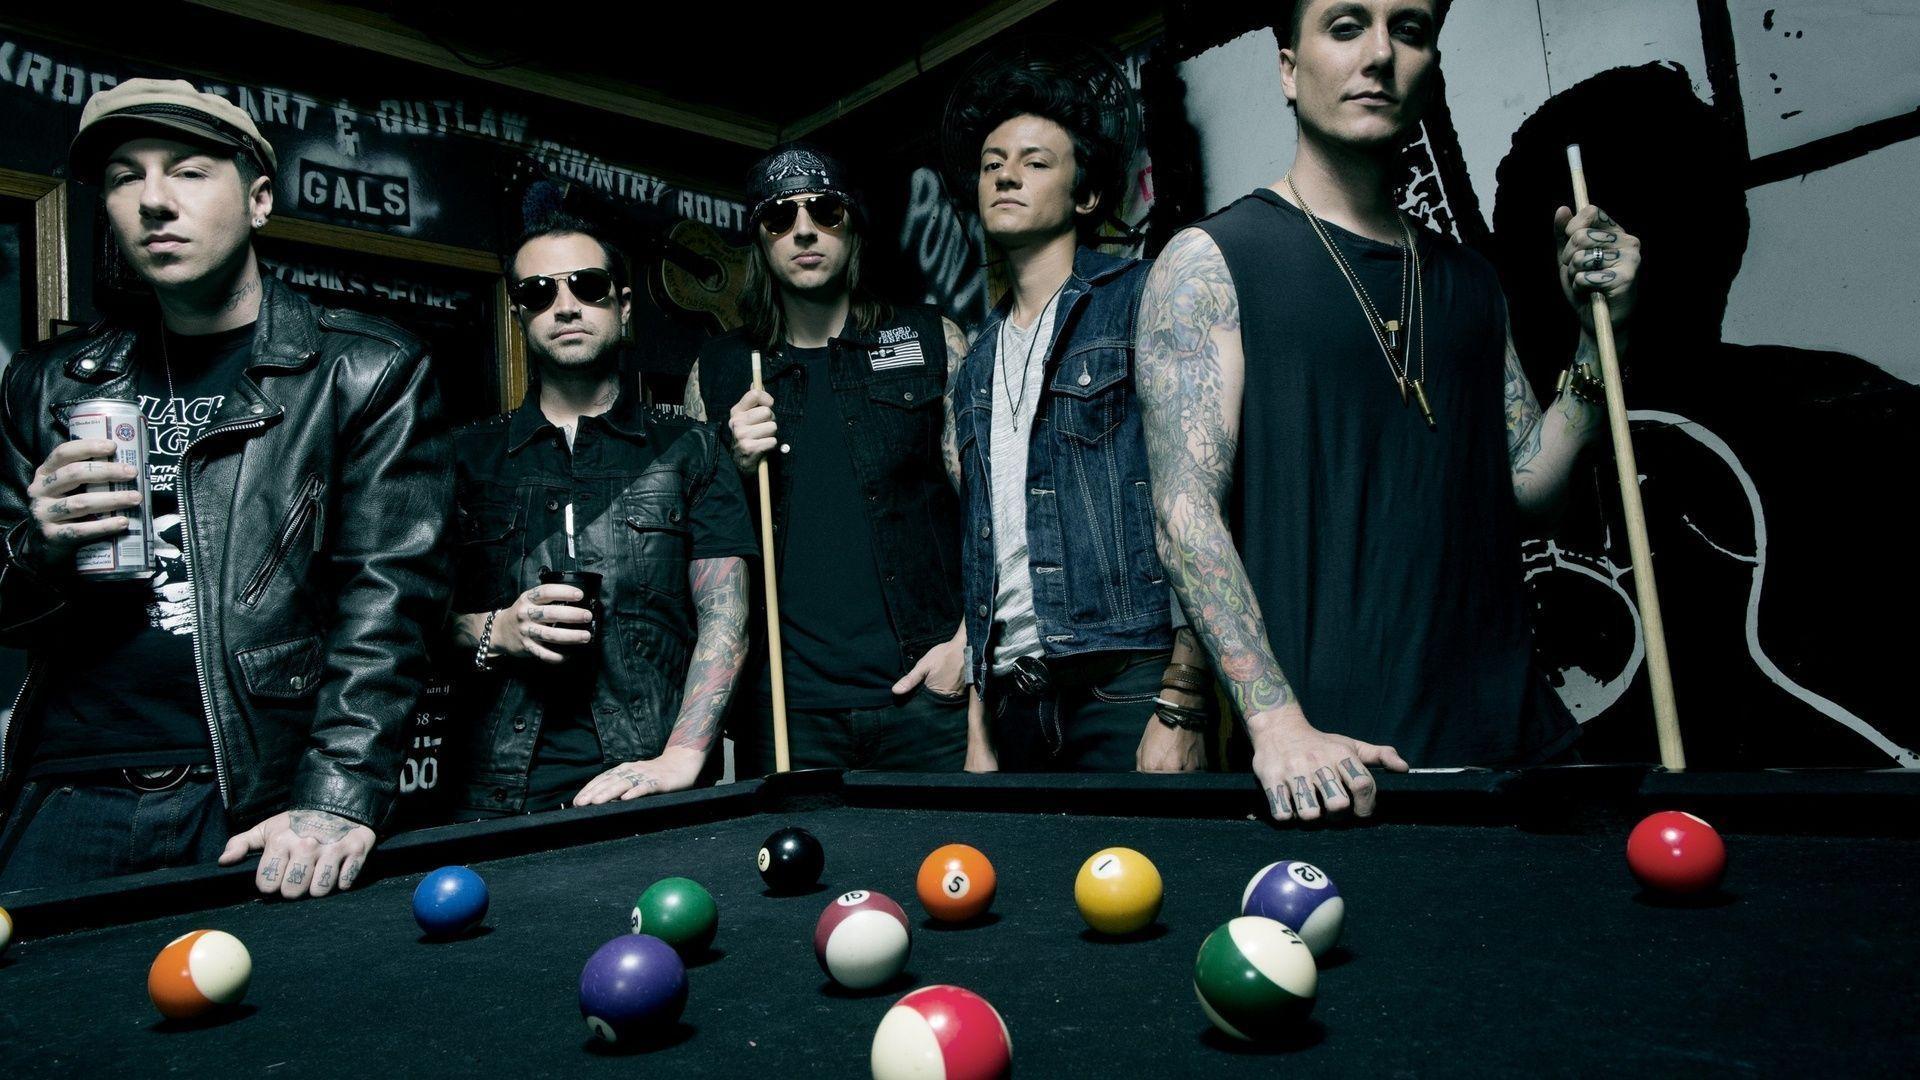 Avenged Sevenfold 2017 Wallpapers 1920x1080